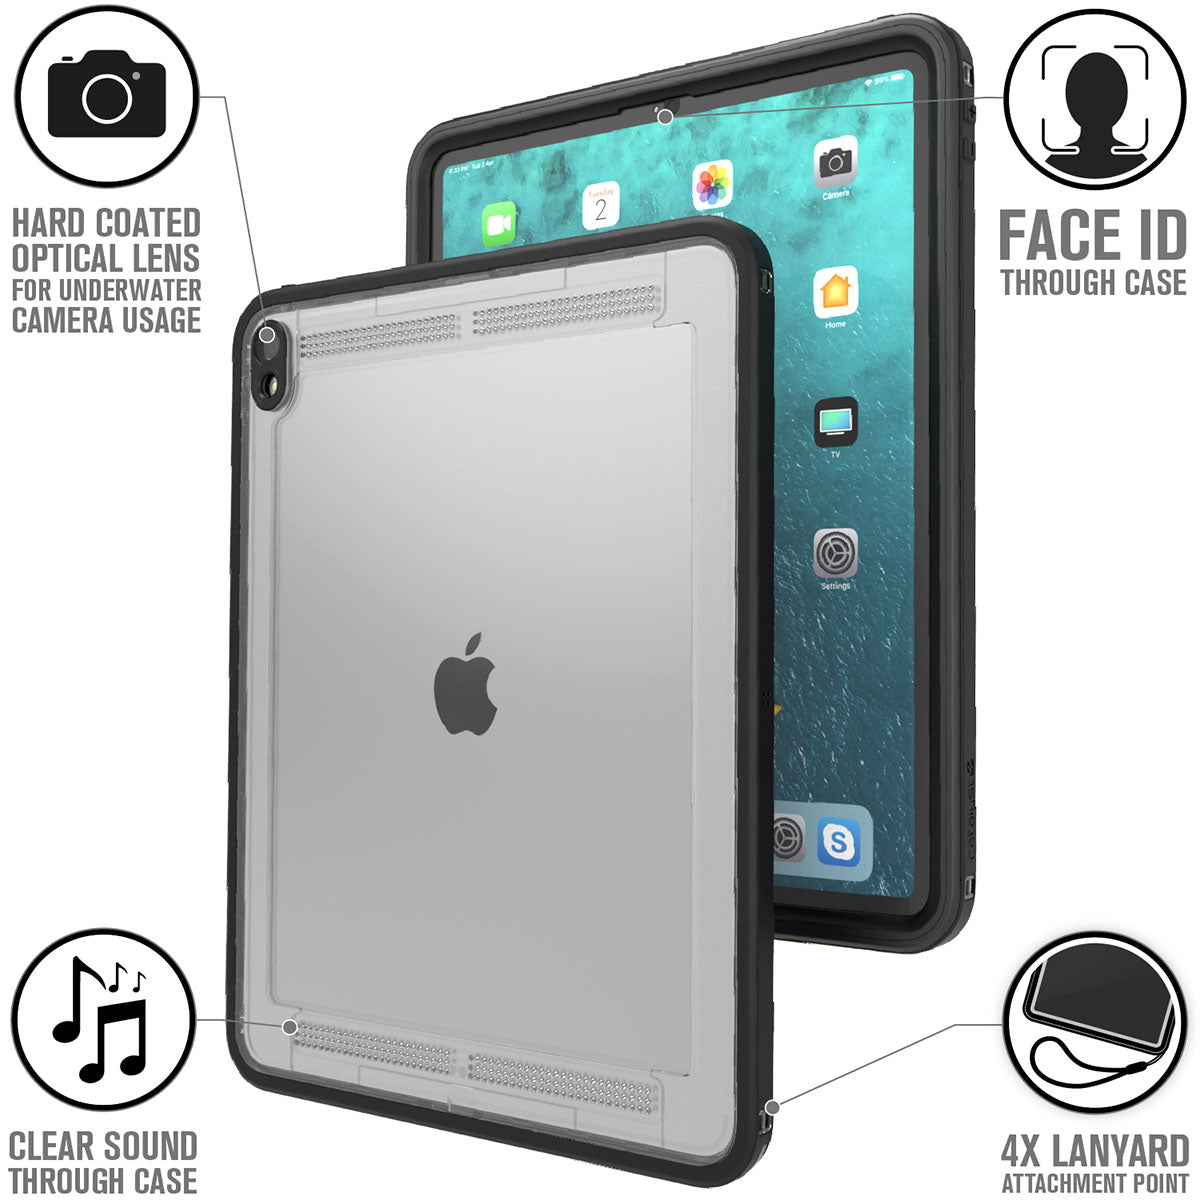 catalyst ipad air gen 3 10.5 waterproof case stealth black front and back view text reads hard coated optical lens for underwater camera usage face id through case clear sound through case 4x lanyard attachment point